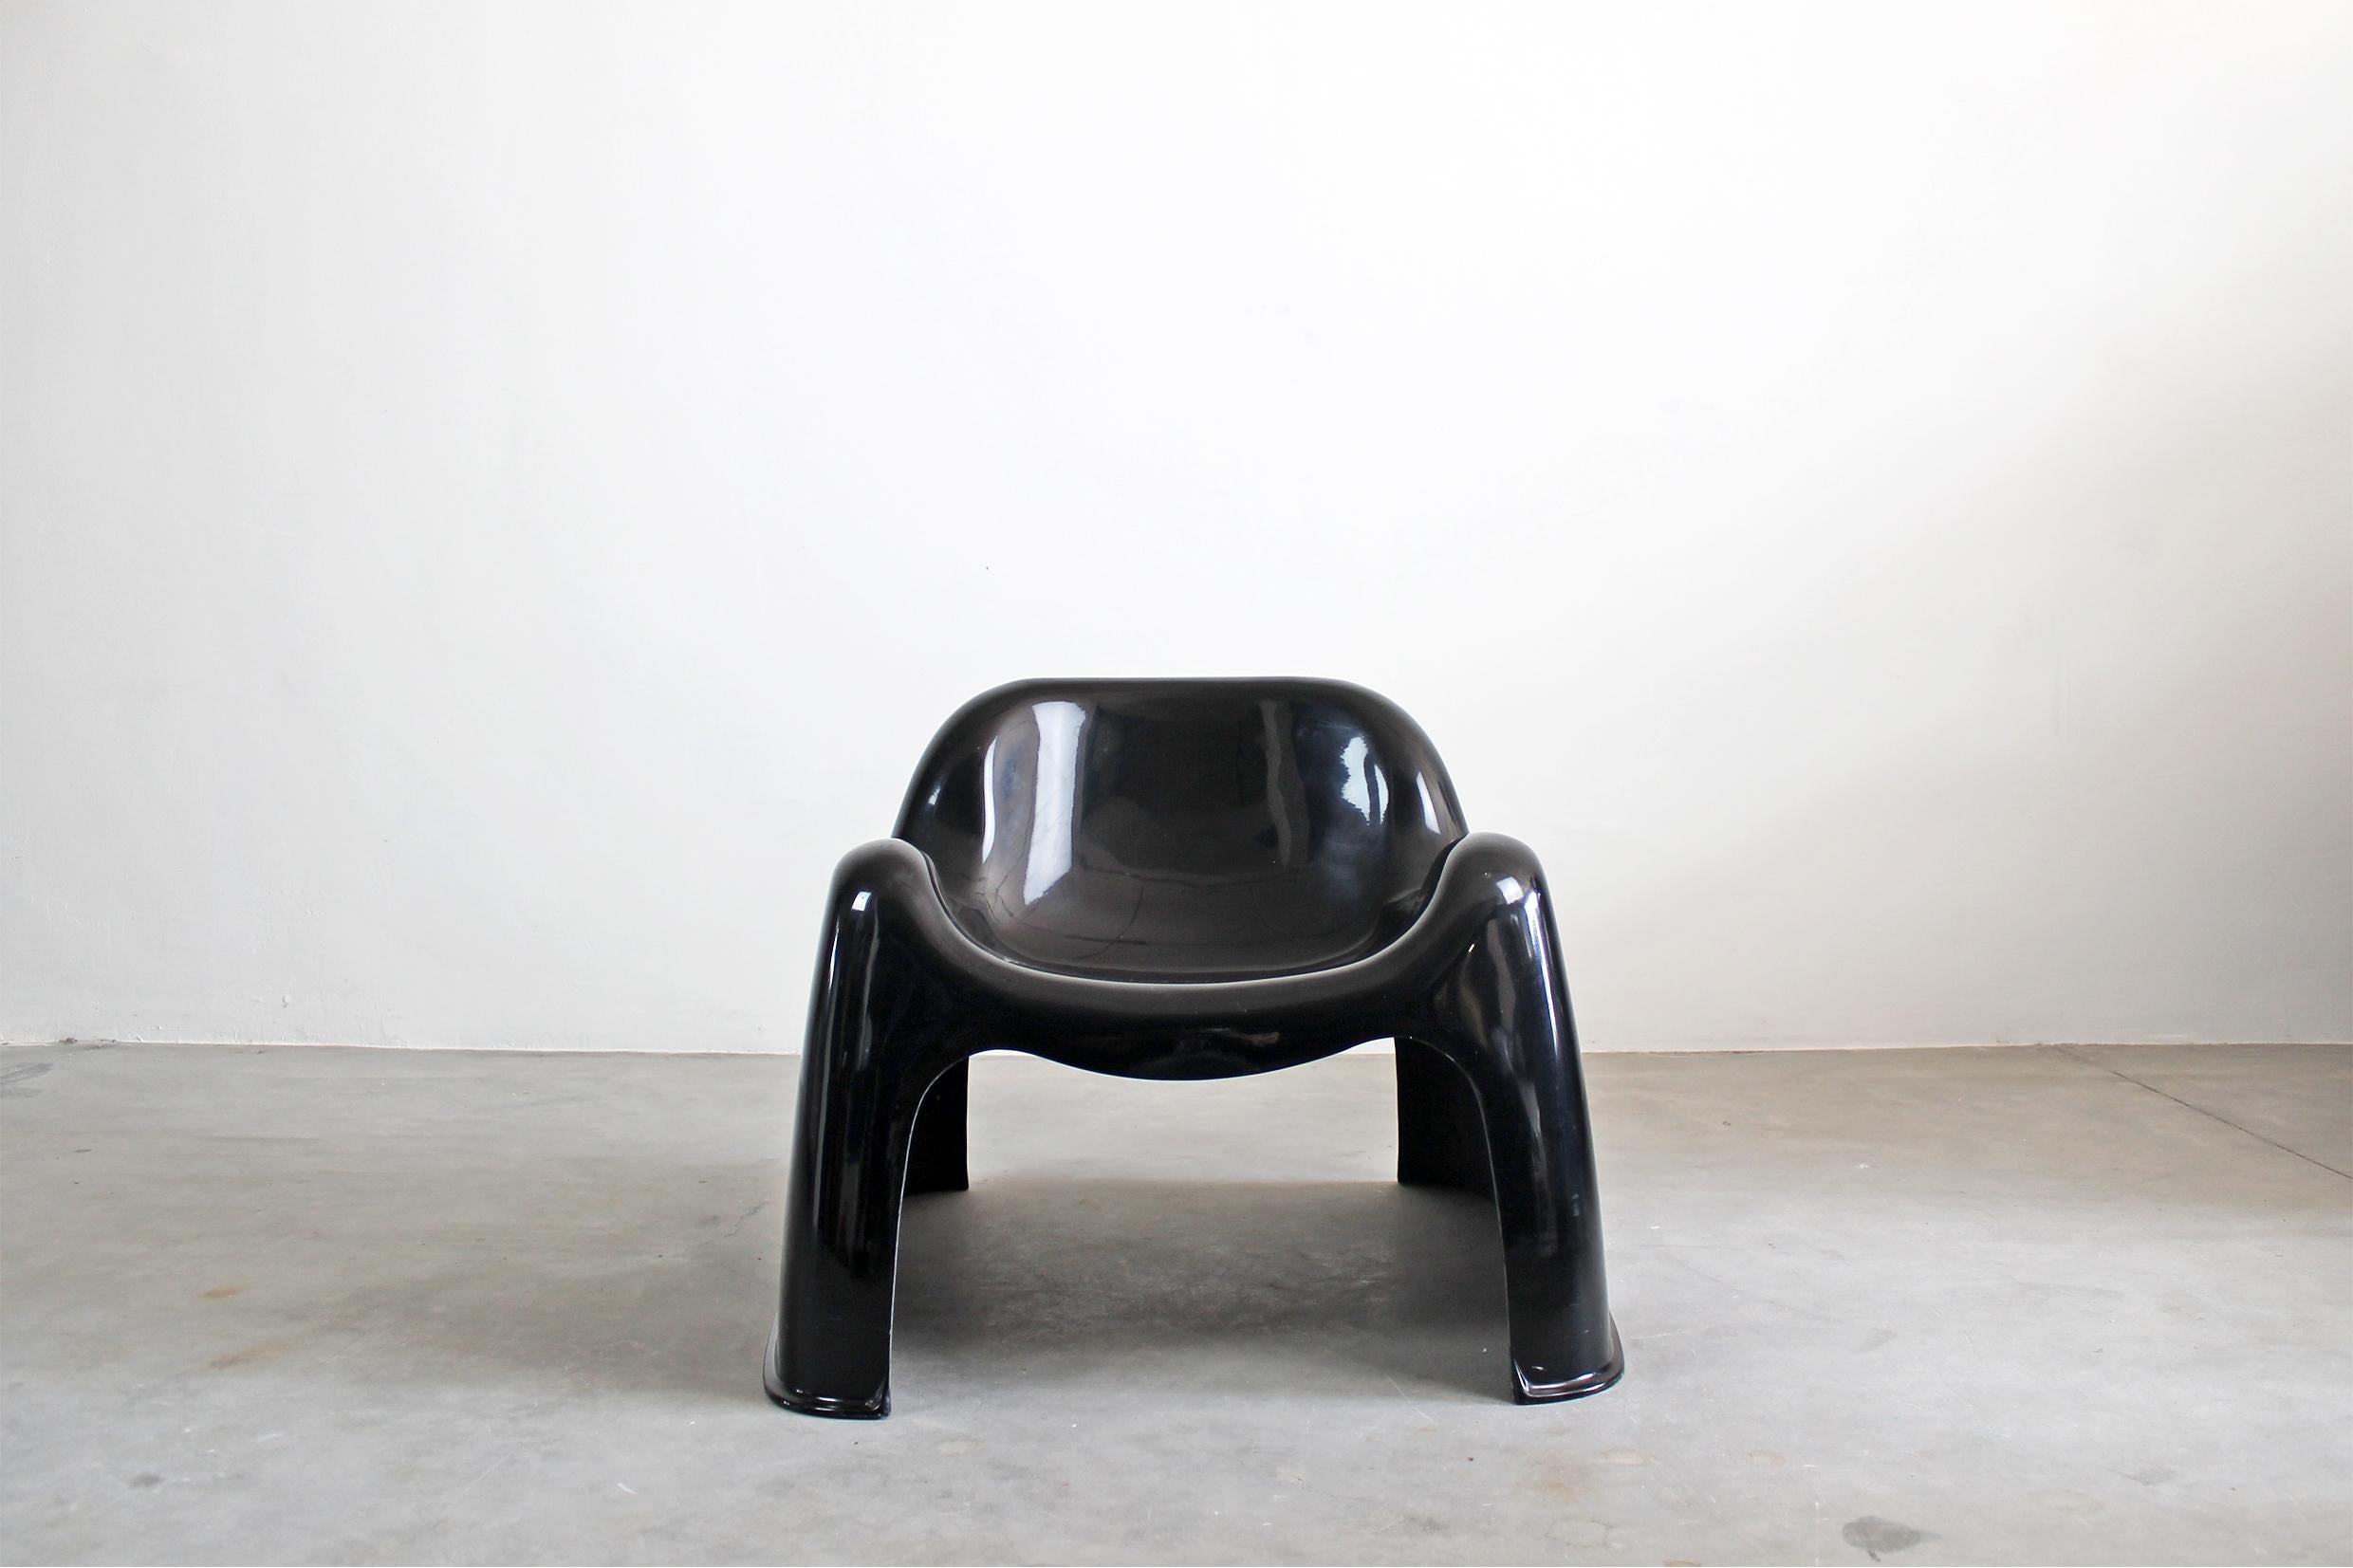 Toga chair was realized in hot-press moulded black fibreglass designed by Sergio Mazza in 1968 and manufactured by Artemide, Italy. 

The Toga chair is part of the Albert & Victoria Museum collection in London

The 'Toga' is a stacking chair,